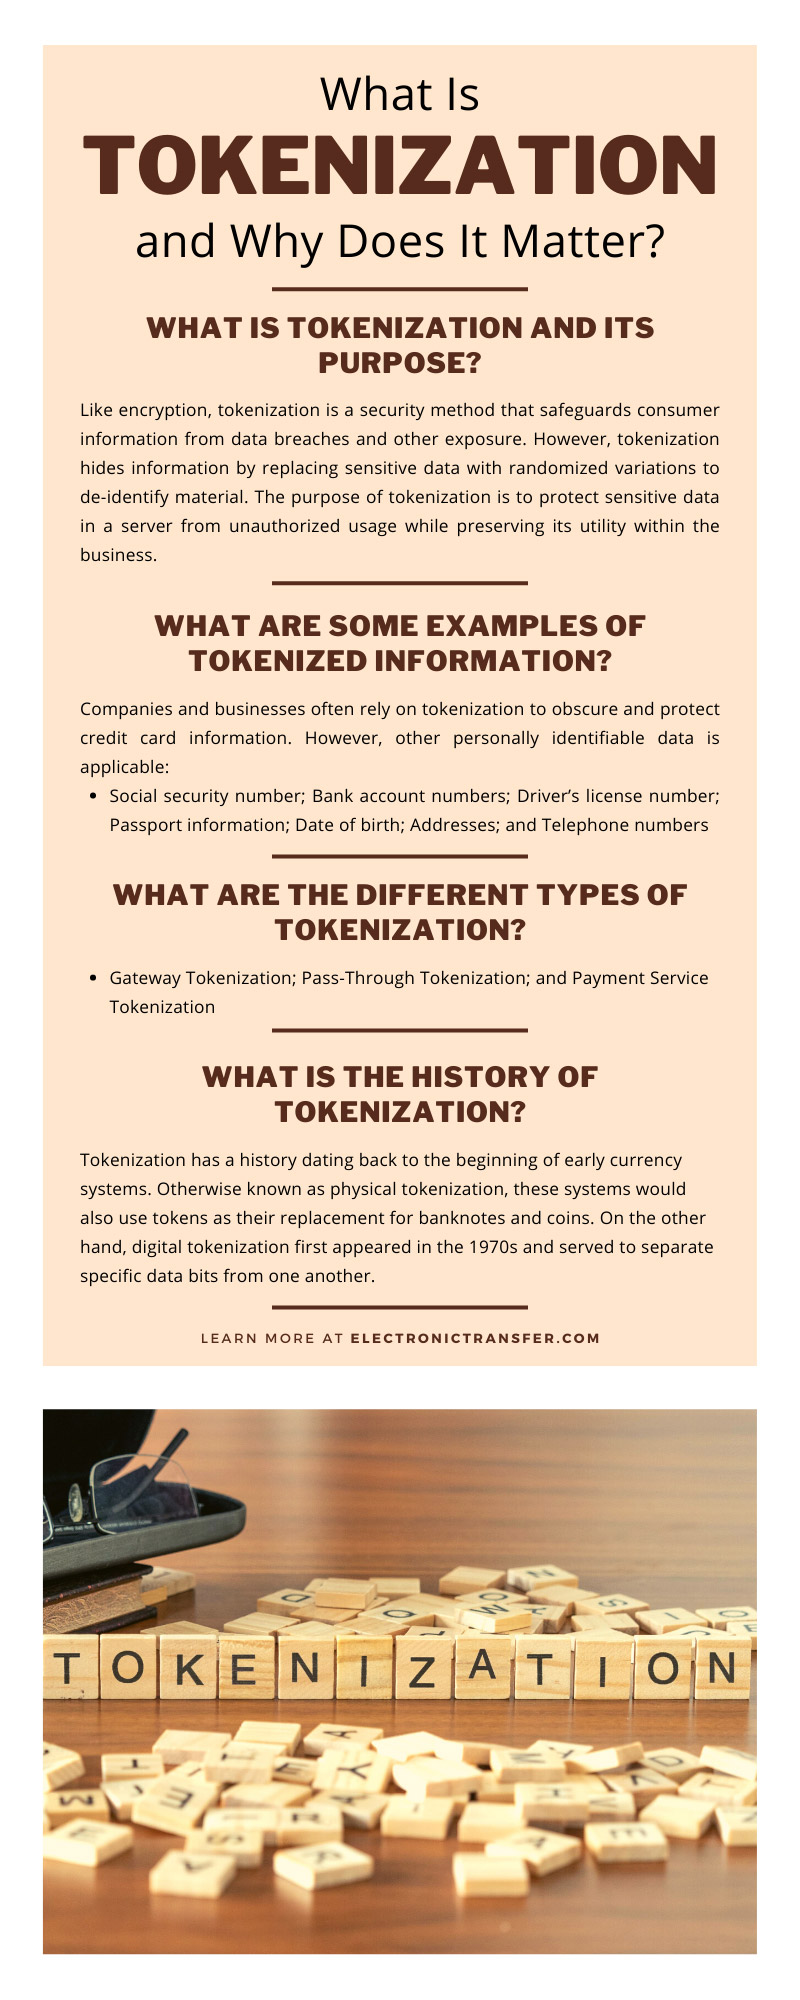 What Is Tokenization and Why Does It Matter?